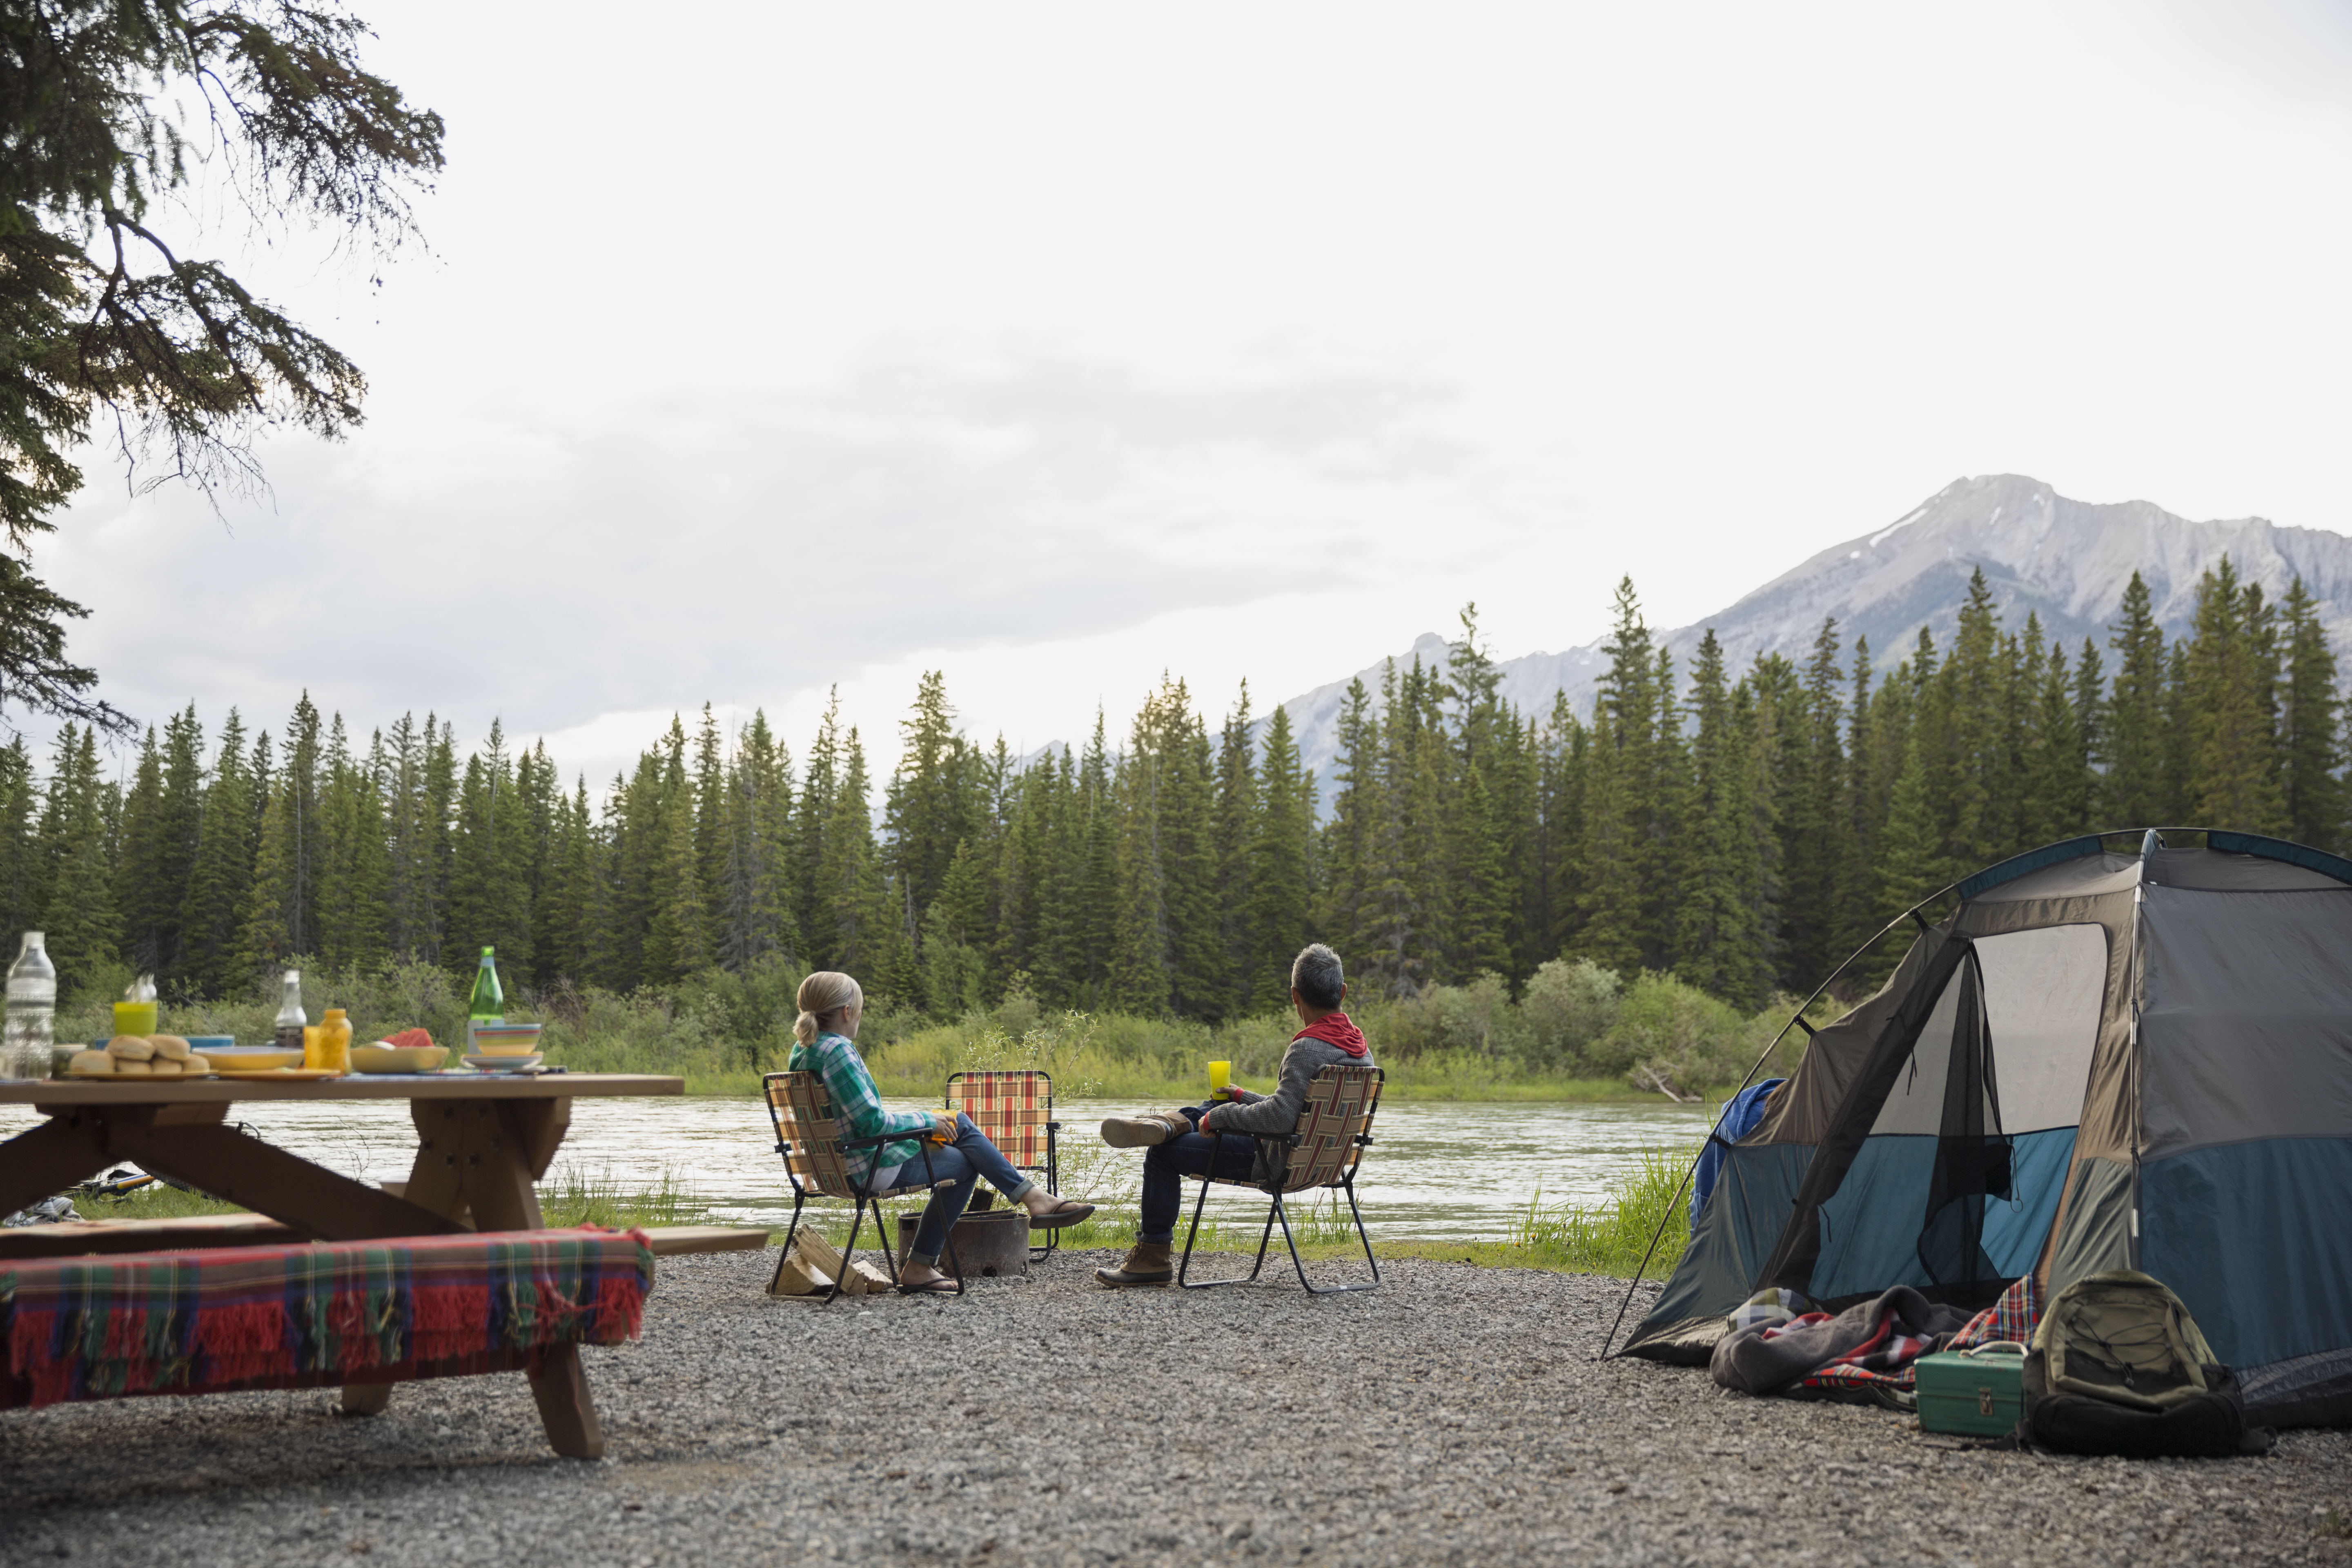 How to Plan the Ultimate Romantic Camping Trip